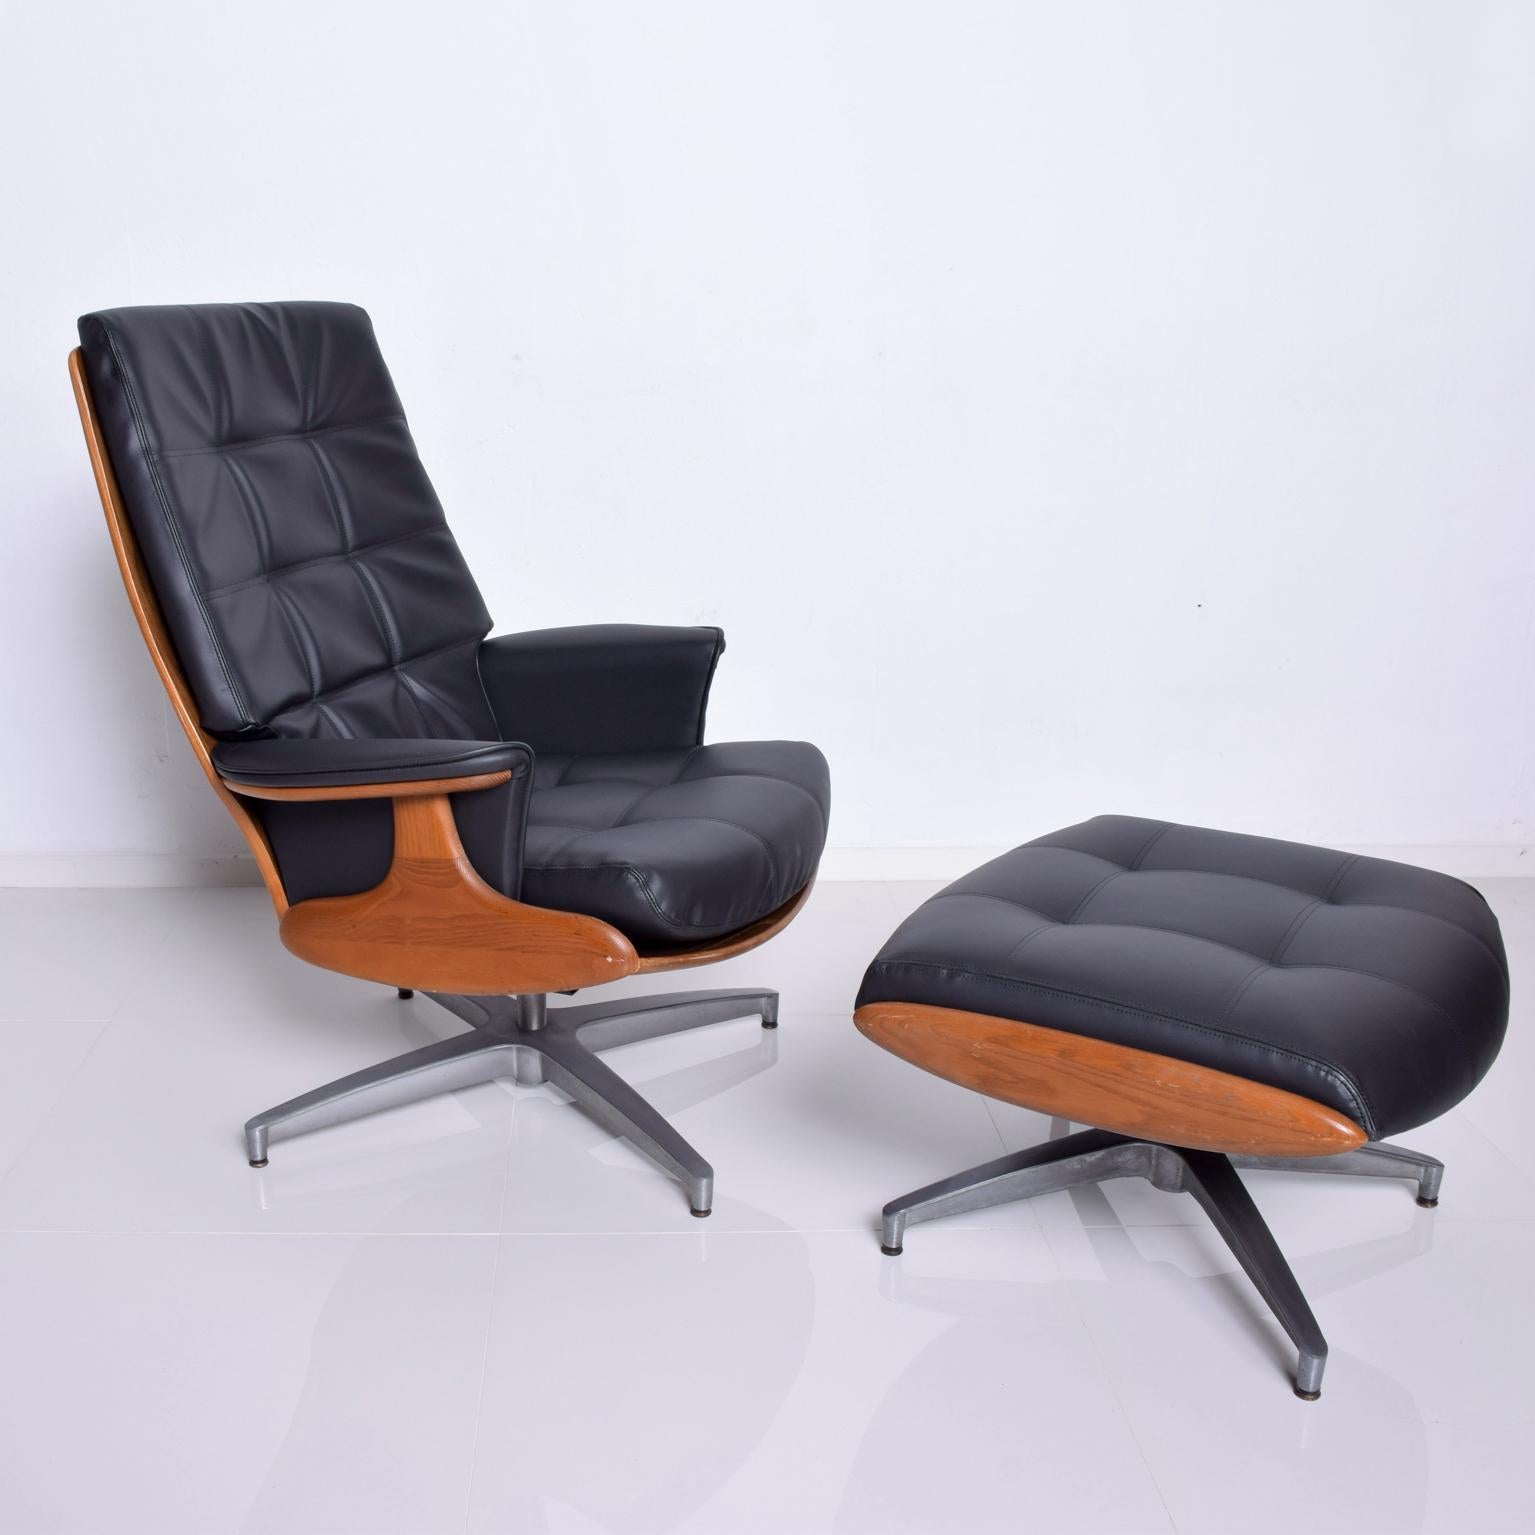 We are pleased to offer you a beautiful lounge chair and matching ottoman by Heywood Wakefield. 

Teak wood with clean Danish modern lines. New upholstery in faux black leather. 

Made in the USA, circa 1960s.

Dimensions: 39